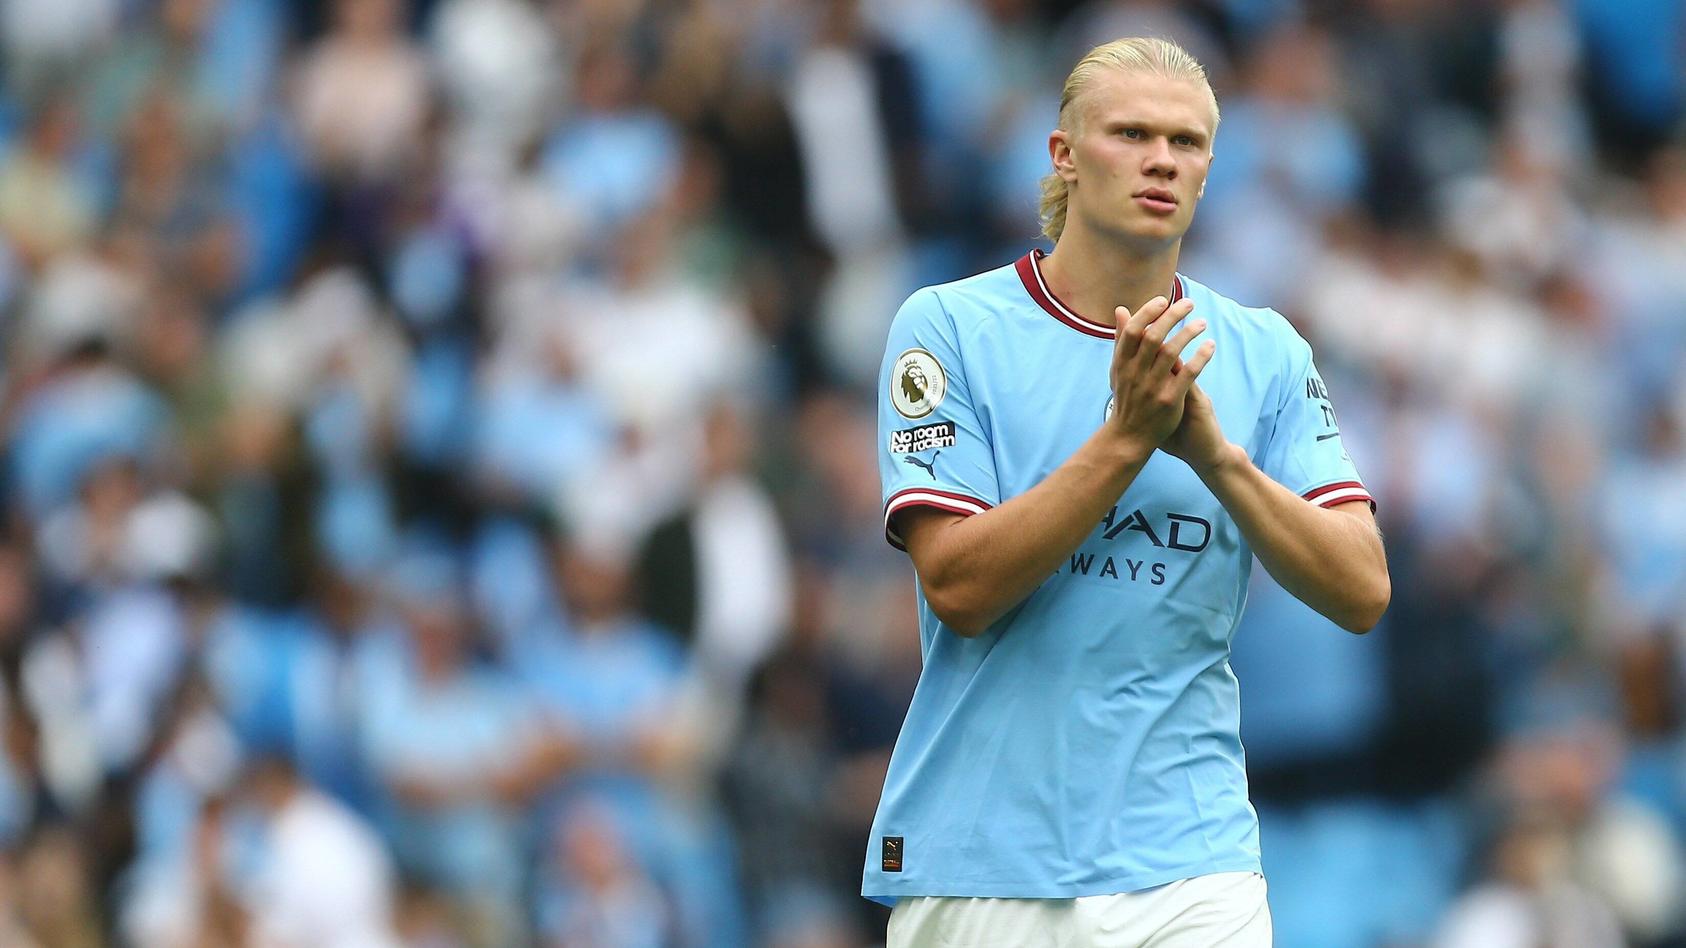 Mandatory Credit: Photo by Phil Oldham/Shutterstock 13329485fc Erling Haaland of Manchester City Manchester City v Crystal Palace, Premier League, Football, Etihad Stadium, Manchester, UK - 27 Aug 2022 Manchester City v Crystal Palace, Premier League